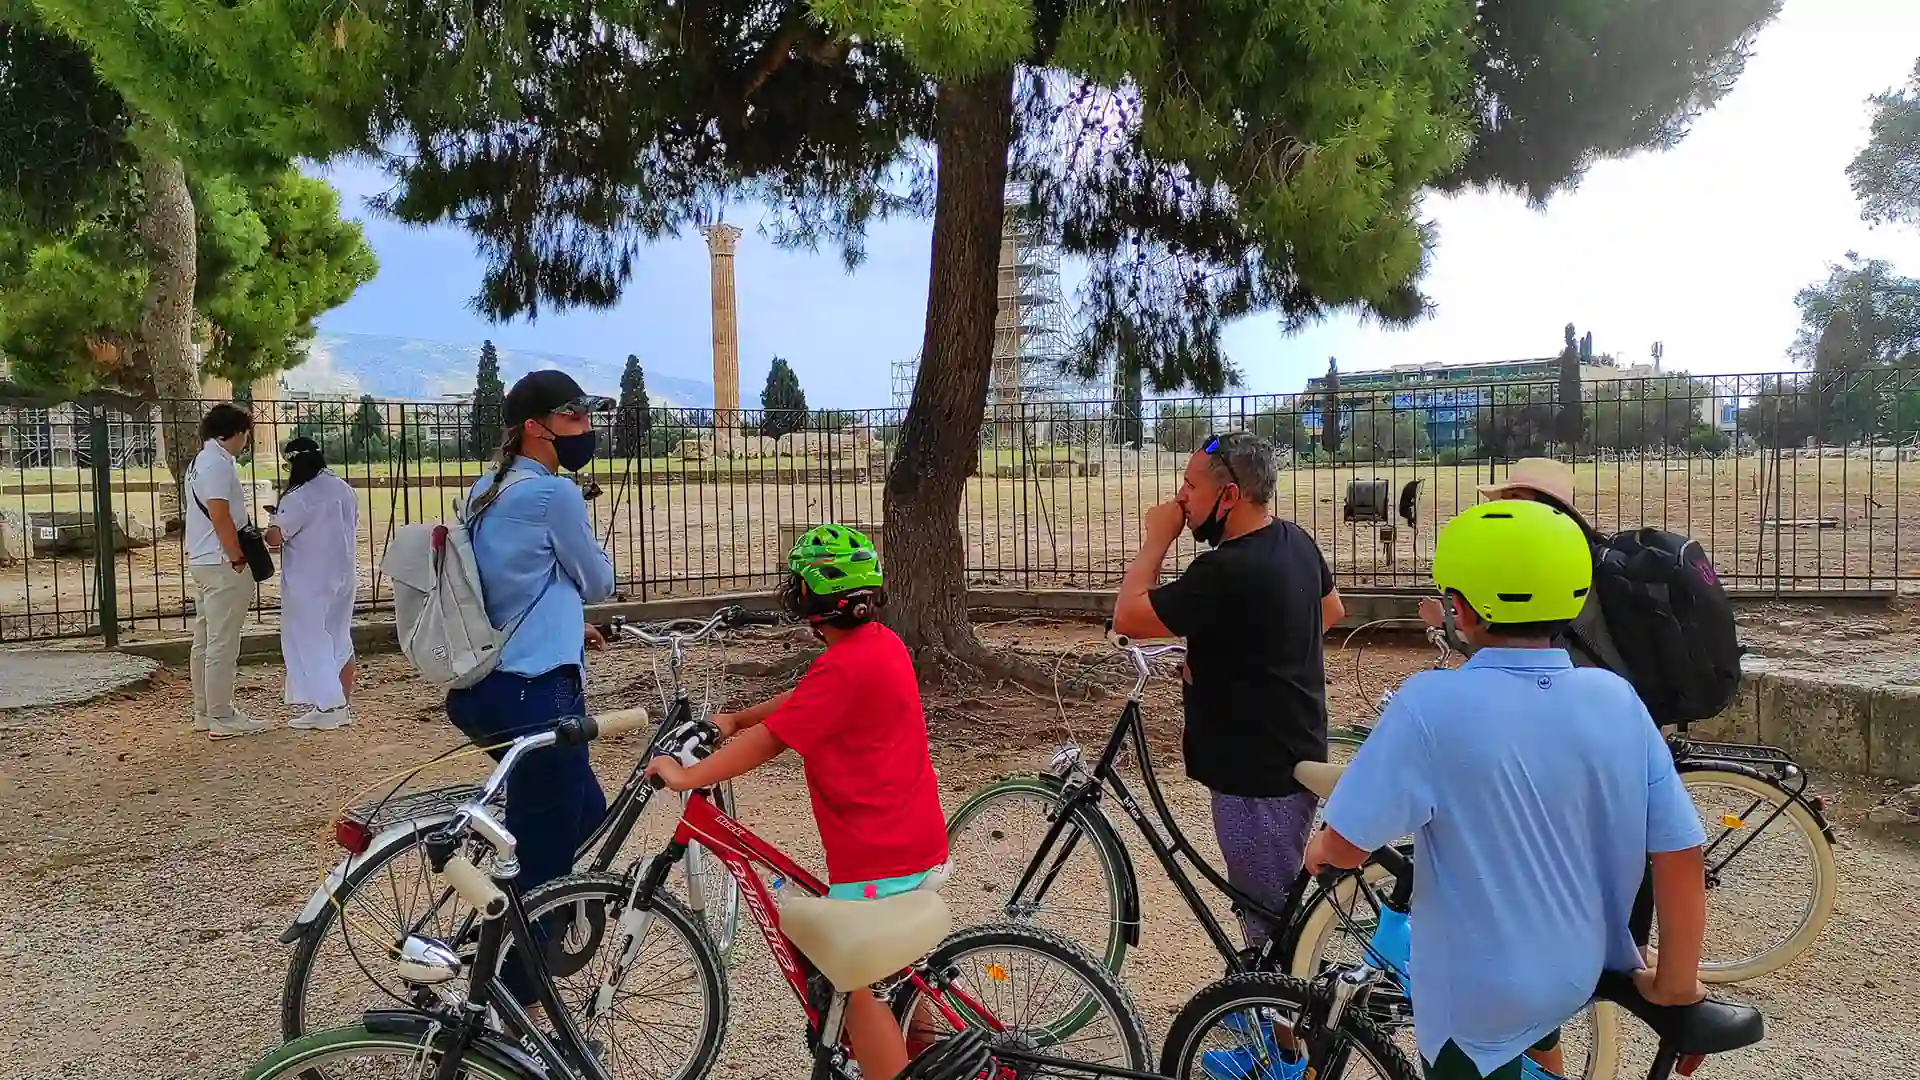 A group rides outside the Temple of Zeus during a Highlights bike tour in Athens.